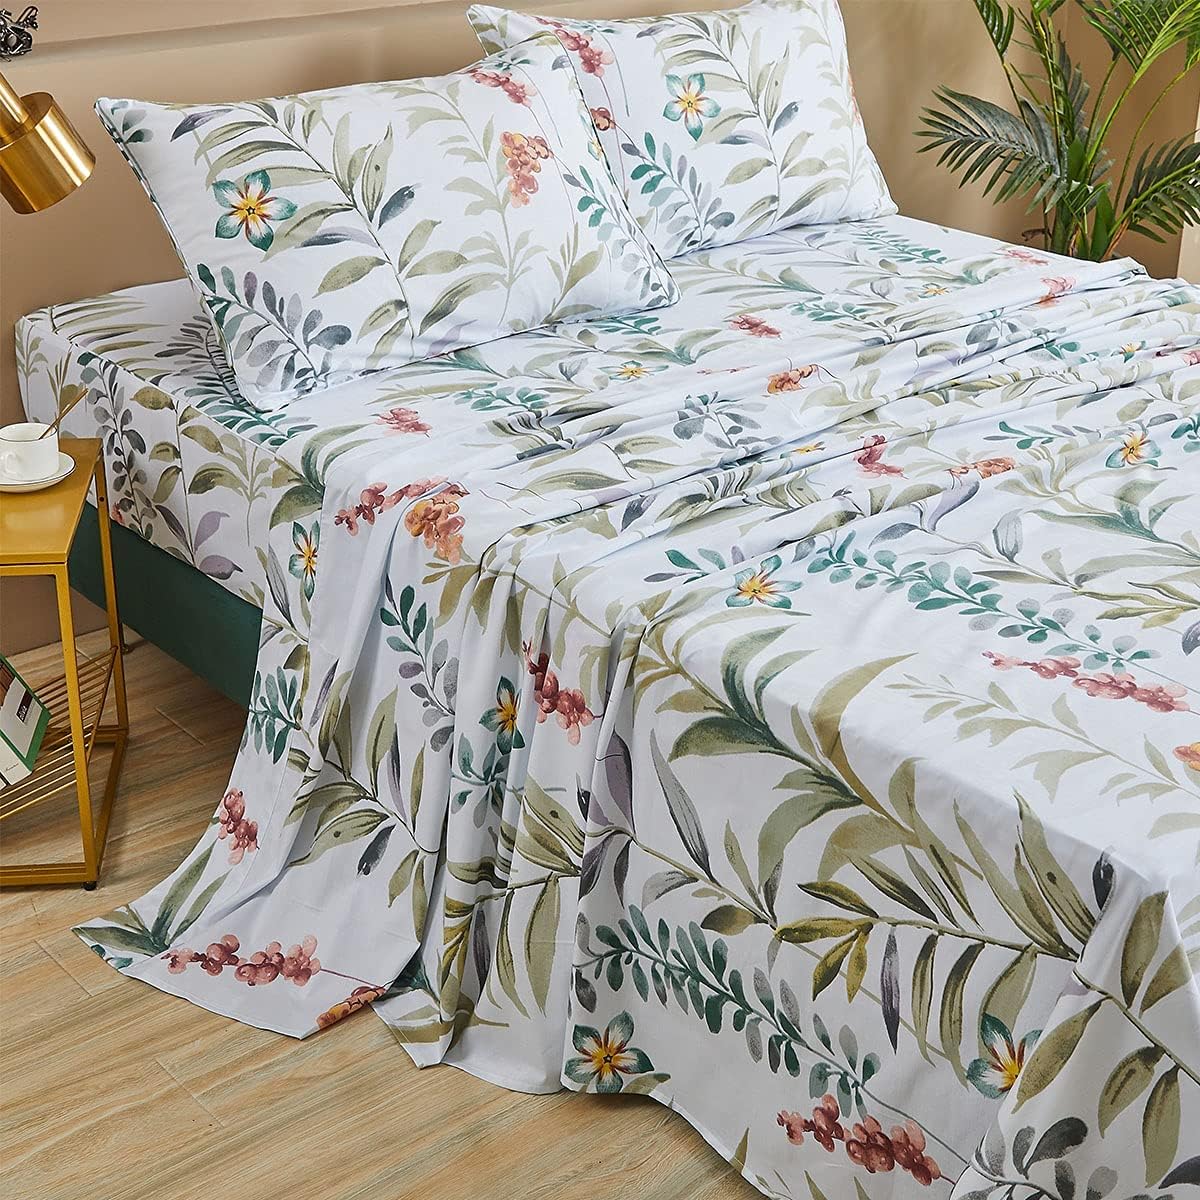 FADFAY Floral Leaves Sheet Set Queen, Premium 100% Cotton 600 TC Green Leaf & Teal Flower Watercolor Farmhouse Bedding, Super Soft Breathable Deep Pocket Bed Sheets Set, 4-Piece Queen